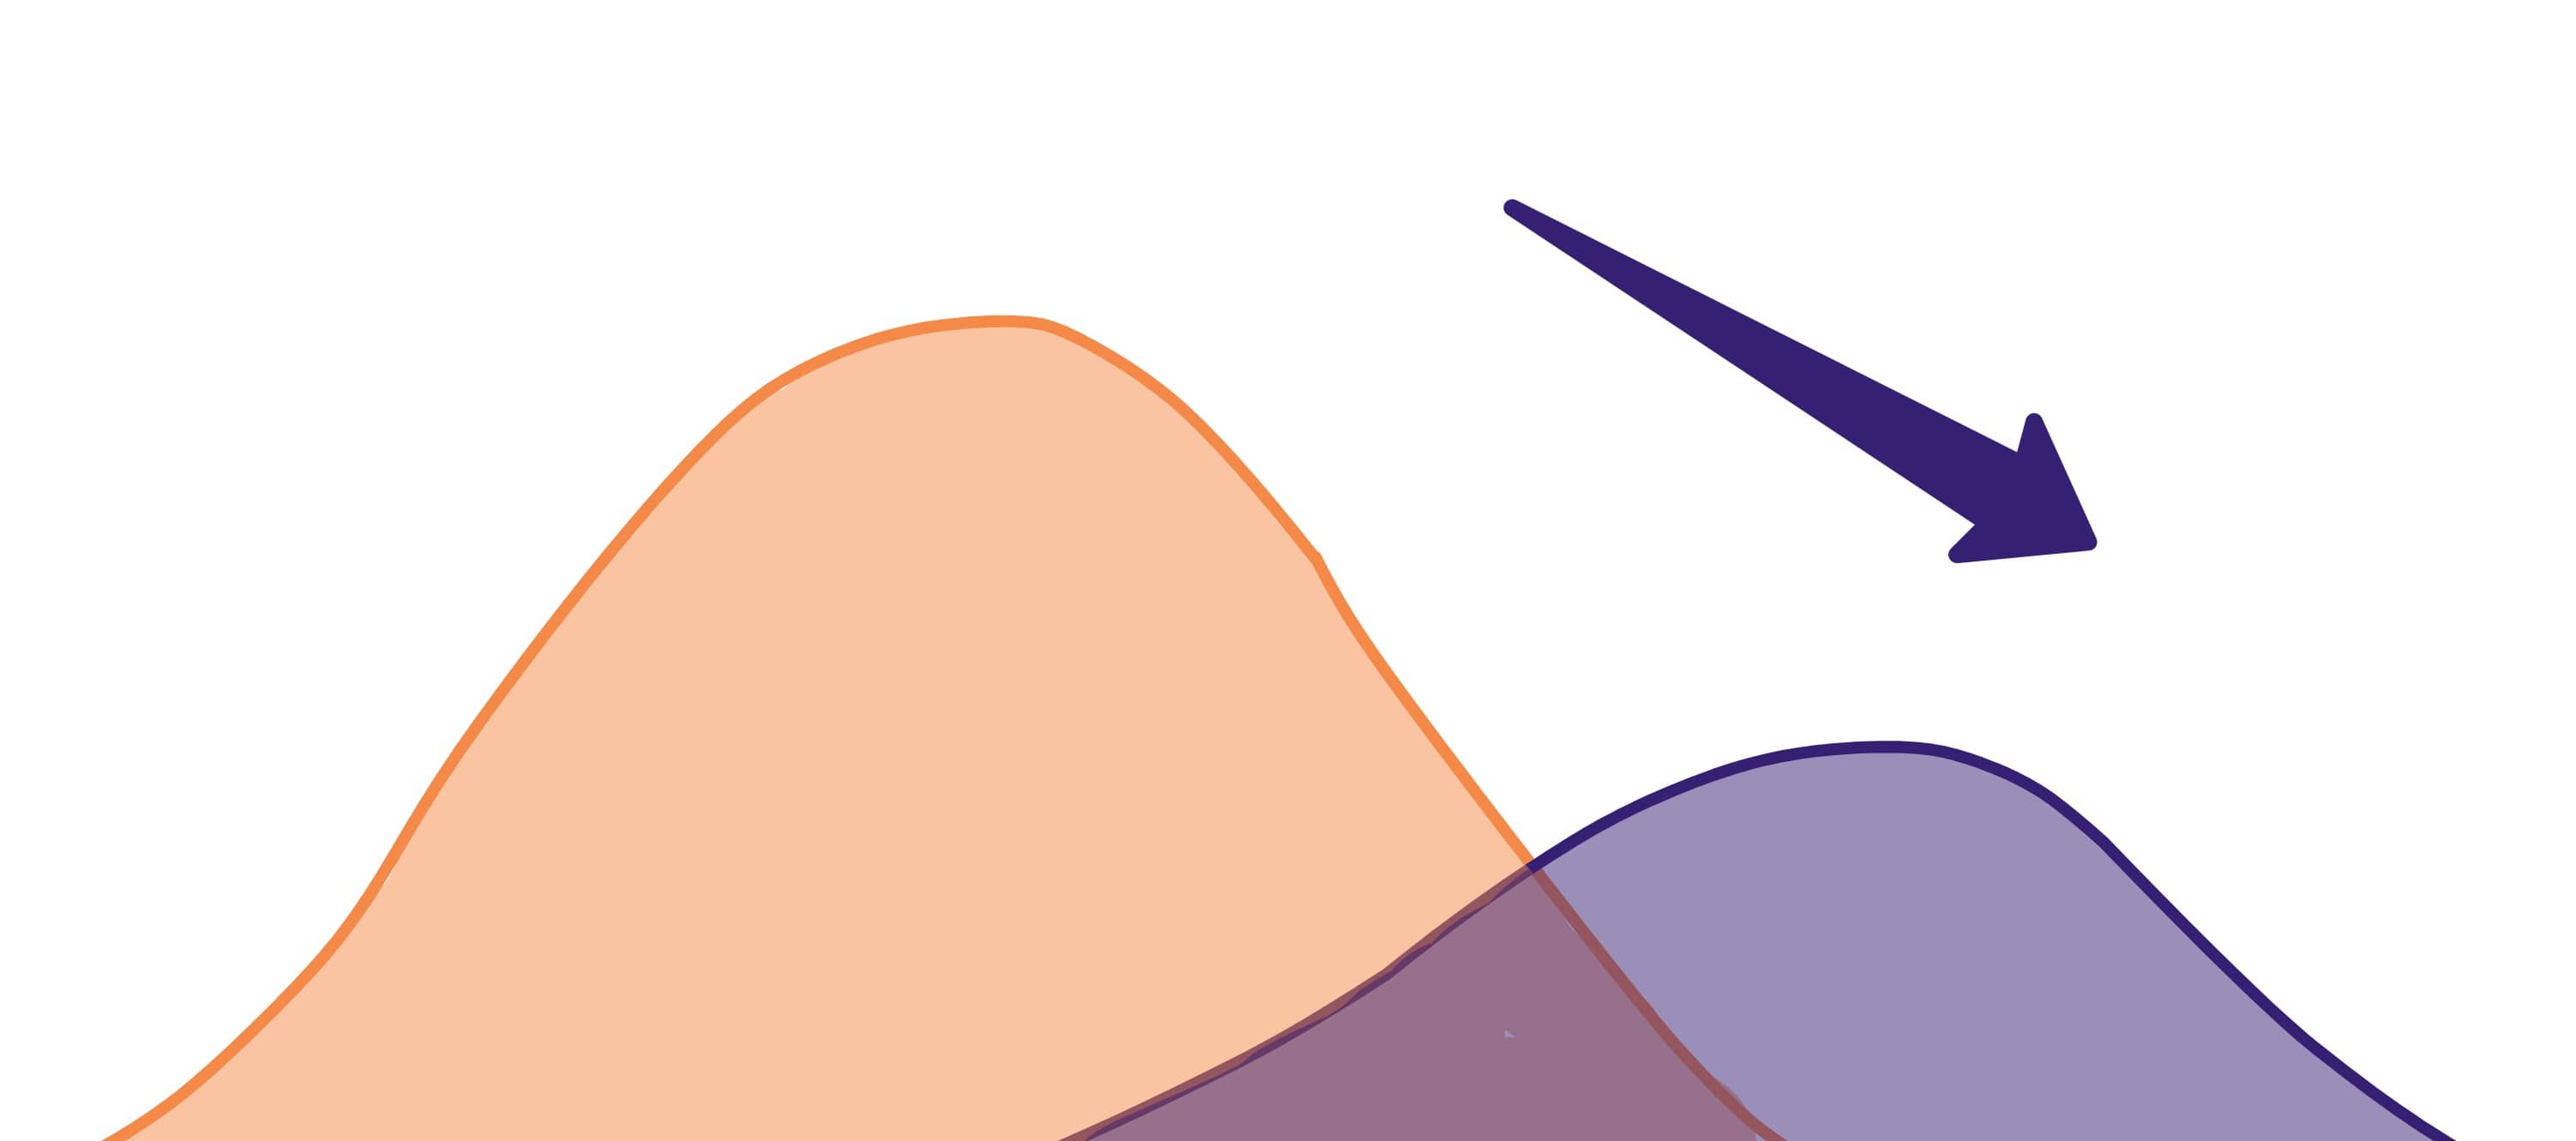 Data drift diagram showing an orange bell curve overlaid by a purple bell curve that is slightly flatter and further to the right than the orange one.